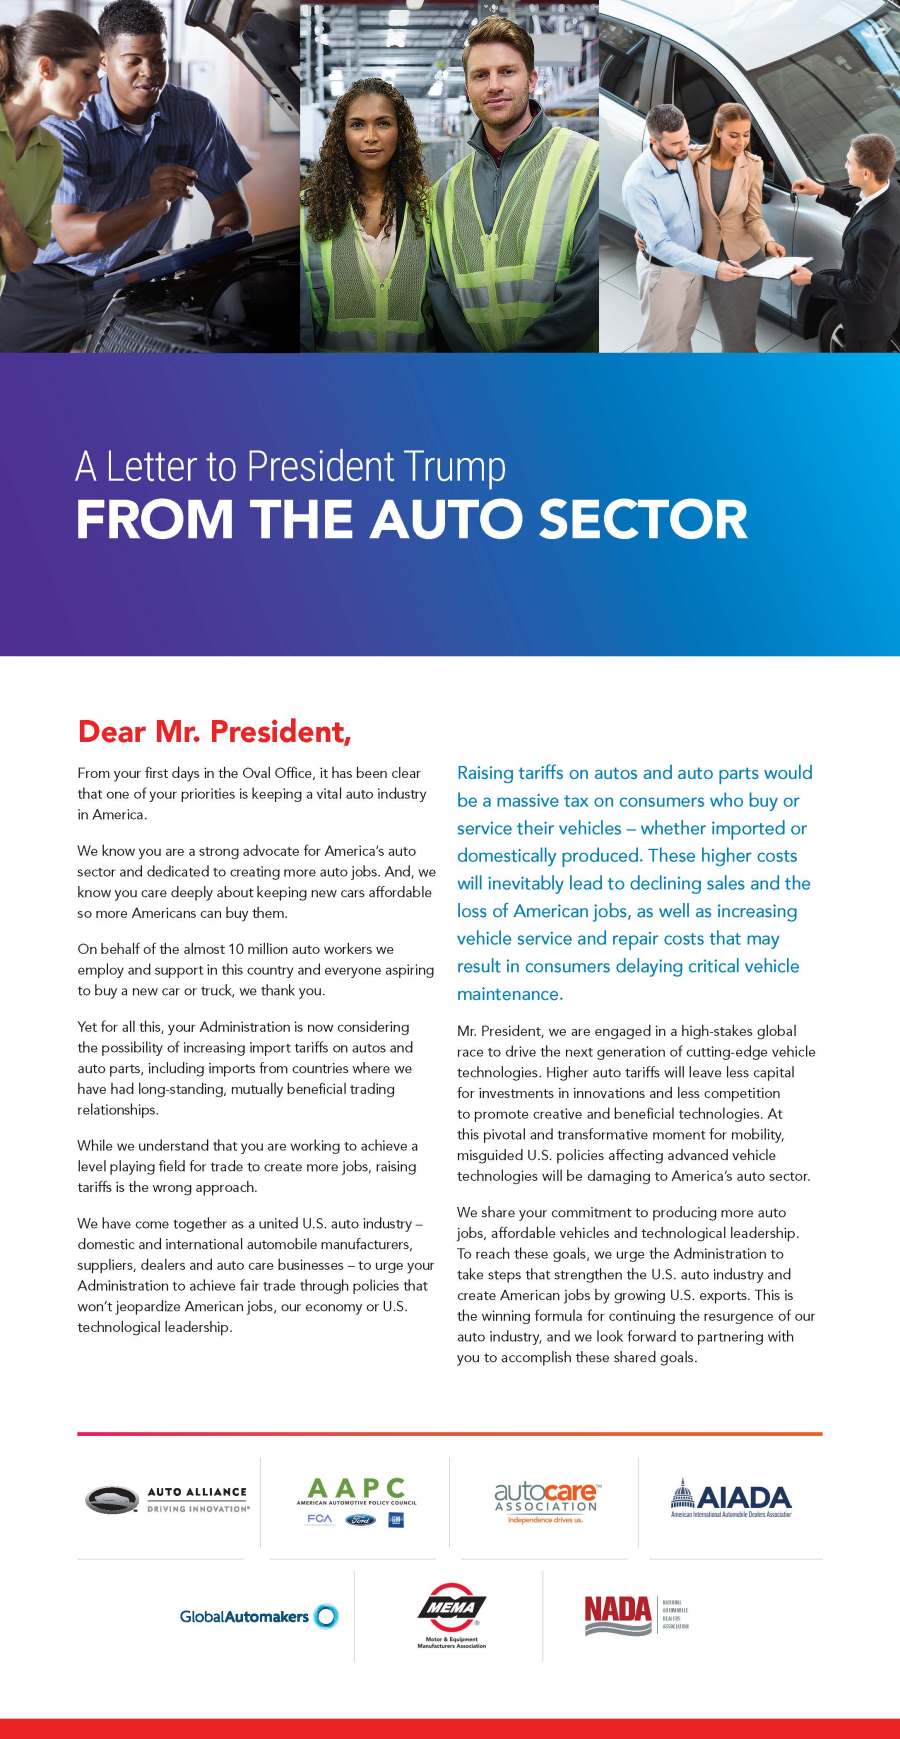 Letter to President Trump from Auto Sector